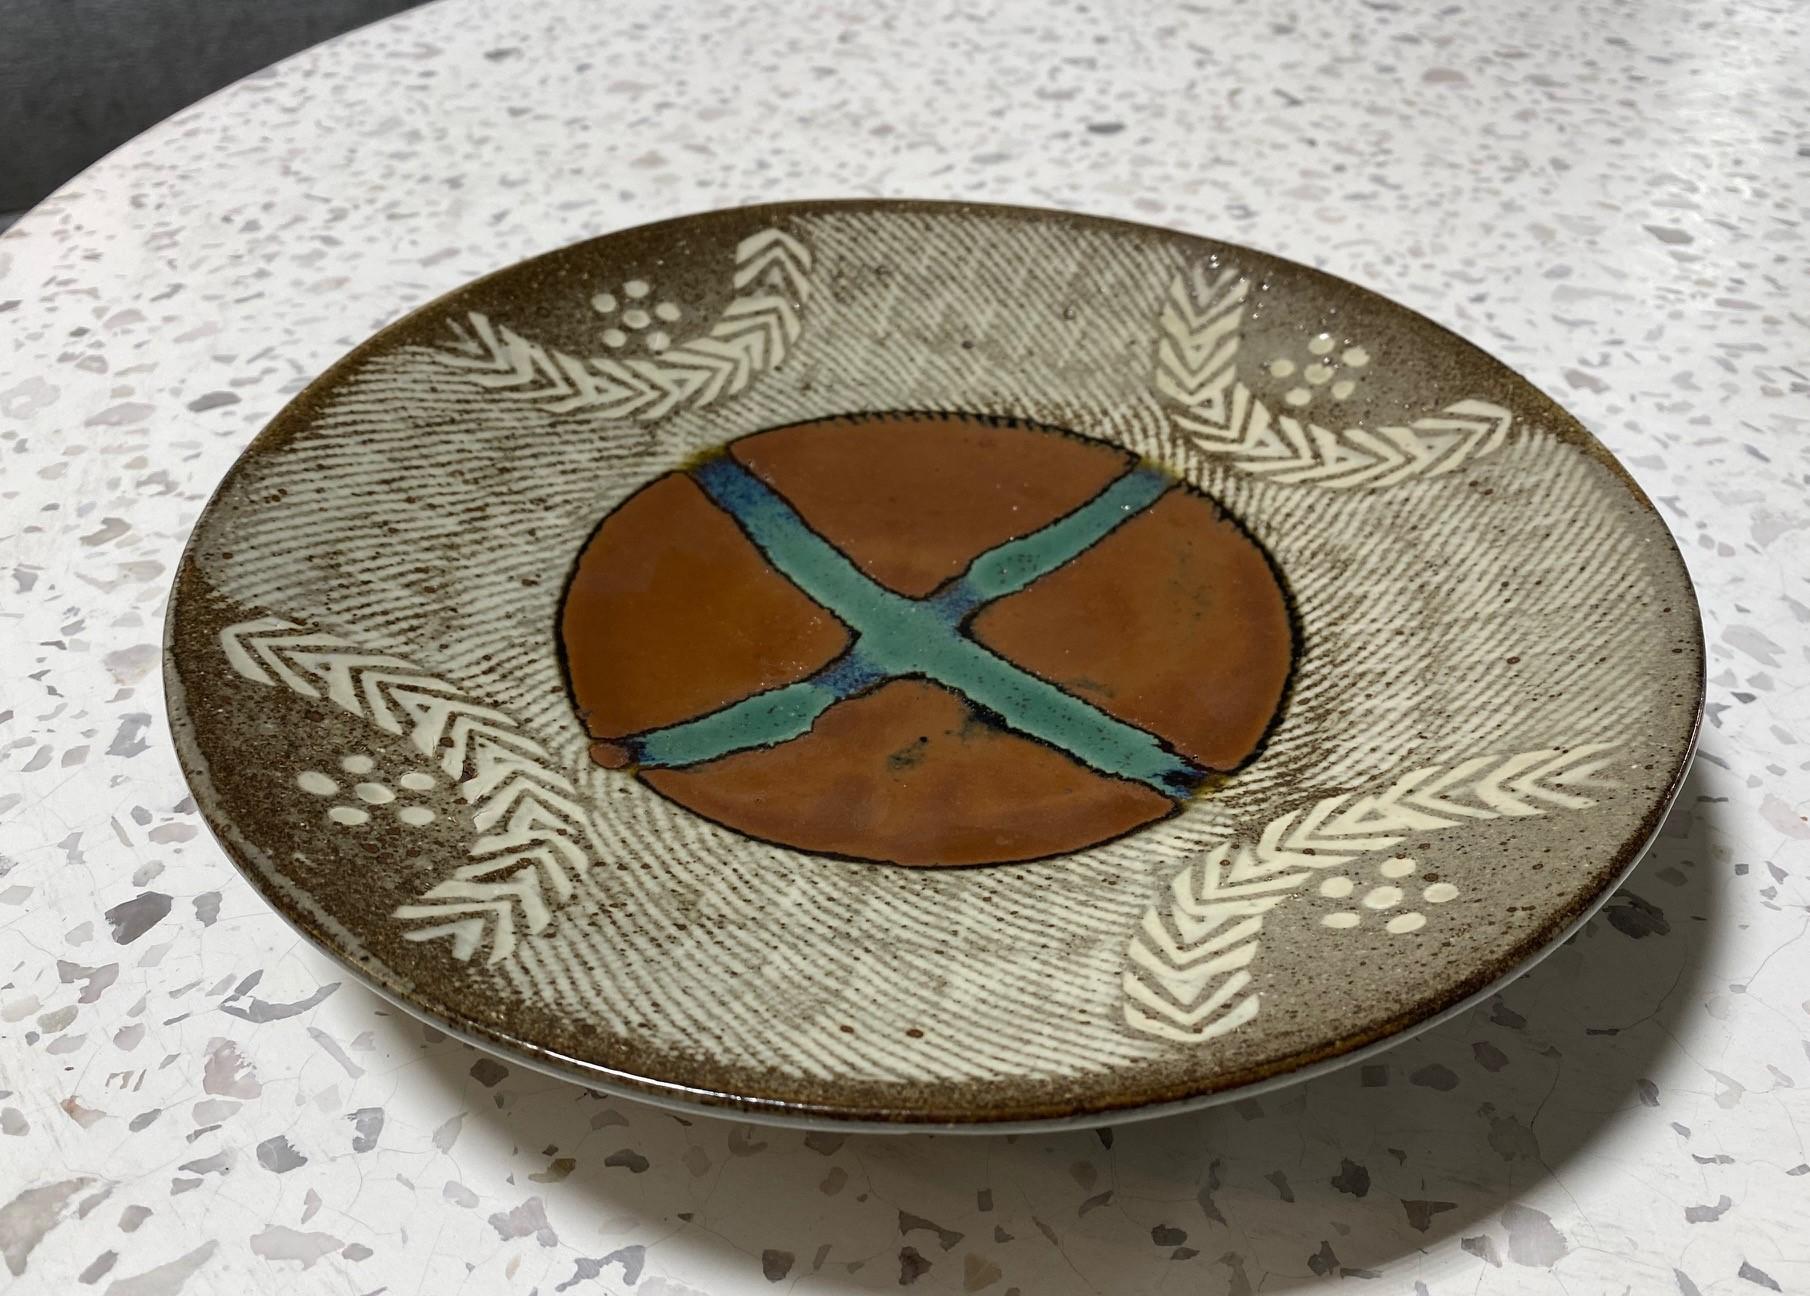 A wonderfully decorated and executed ceramic low bowl/ plate by Japanese National Treasure pottery master Tatsuzo Shimaoka. This work exhibits his signature rope and slip inlay with kaki glaze, wax resist, and green trailed decoration and displays